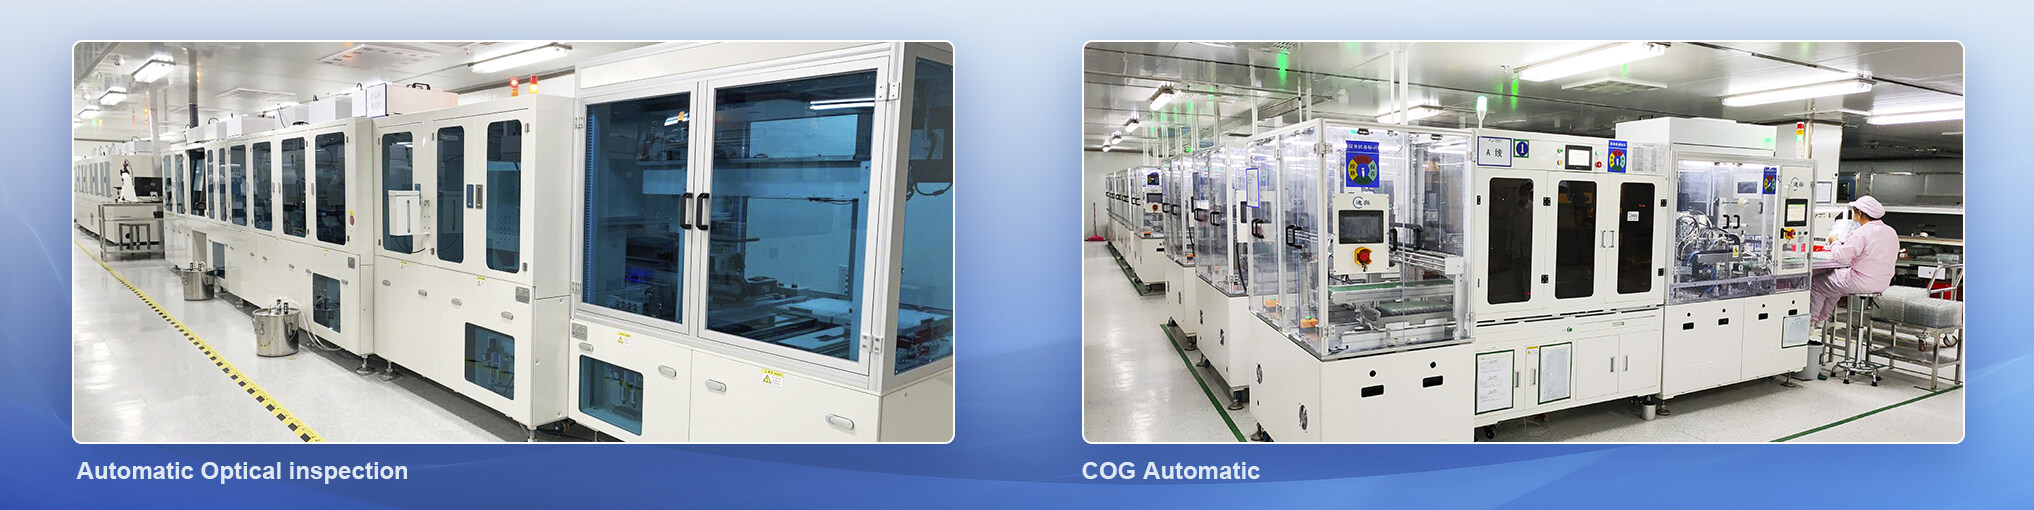 china display touch screen factory,china capacitive touch display,tft touch screen display factory,china touch screen display factory,china touch display factory